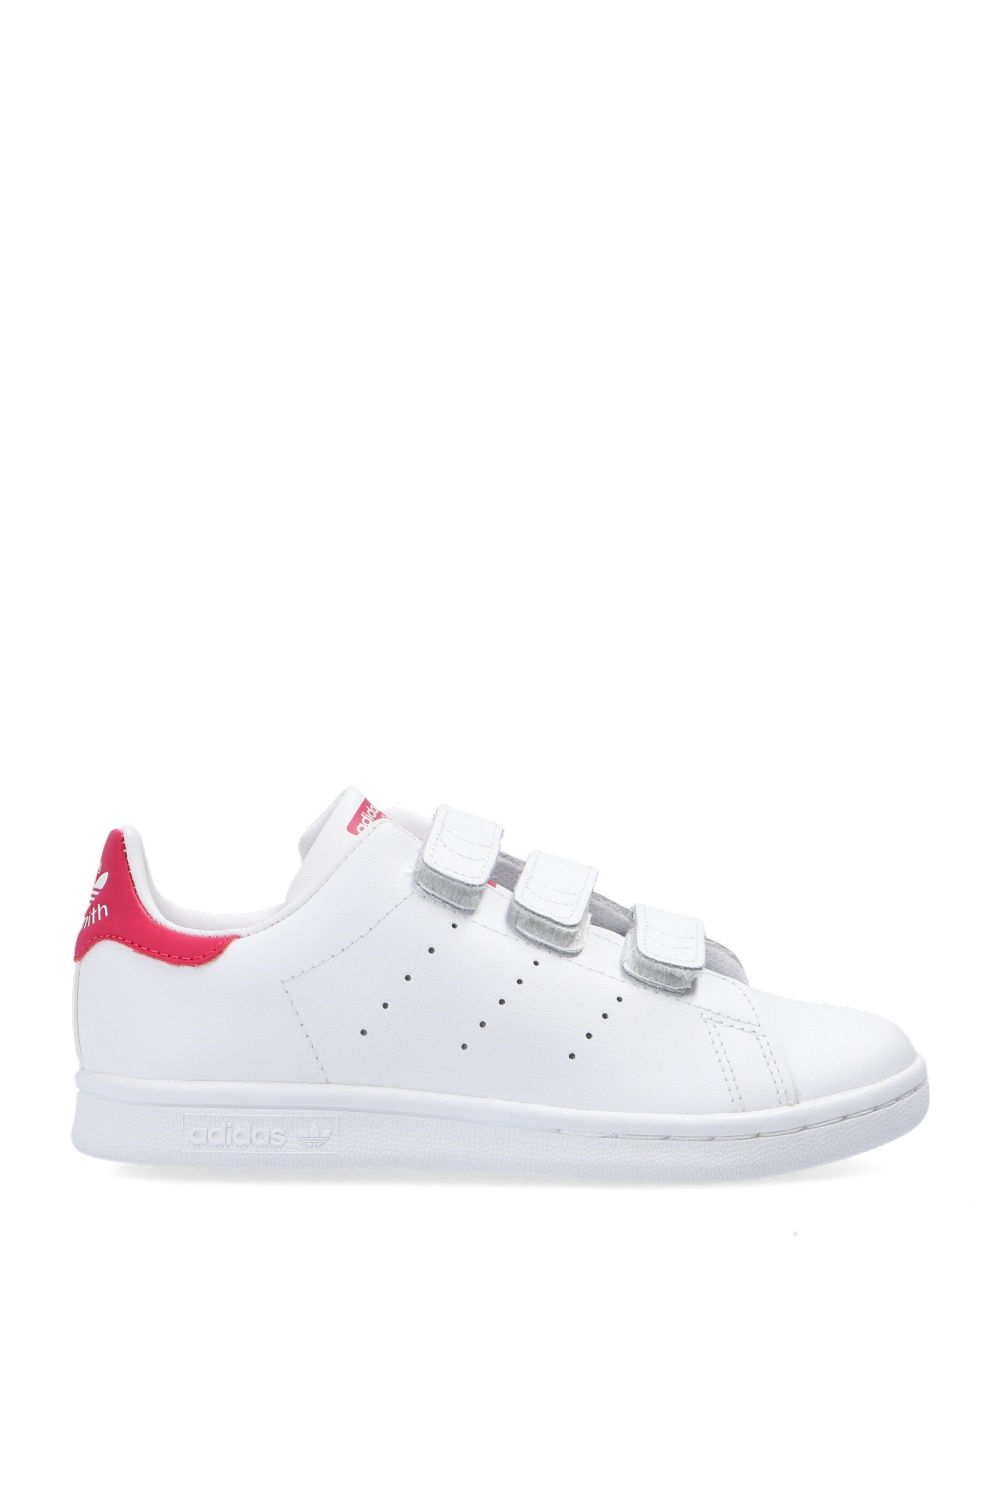 stan smith new release 2018